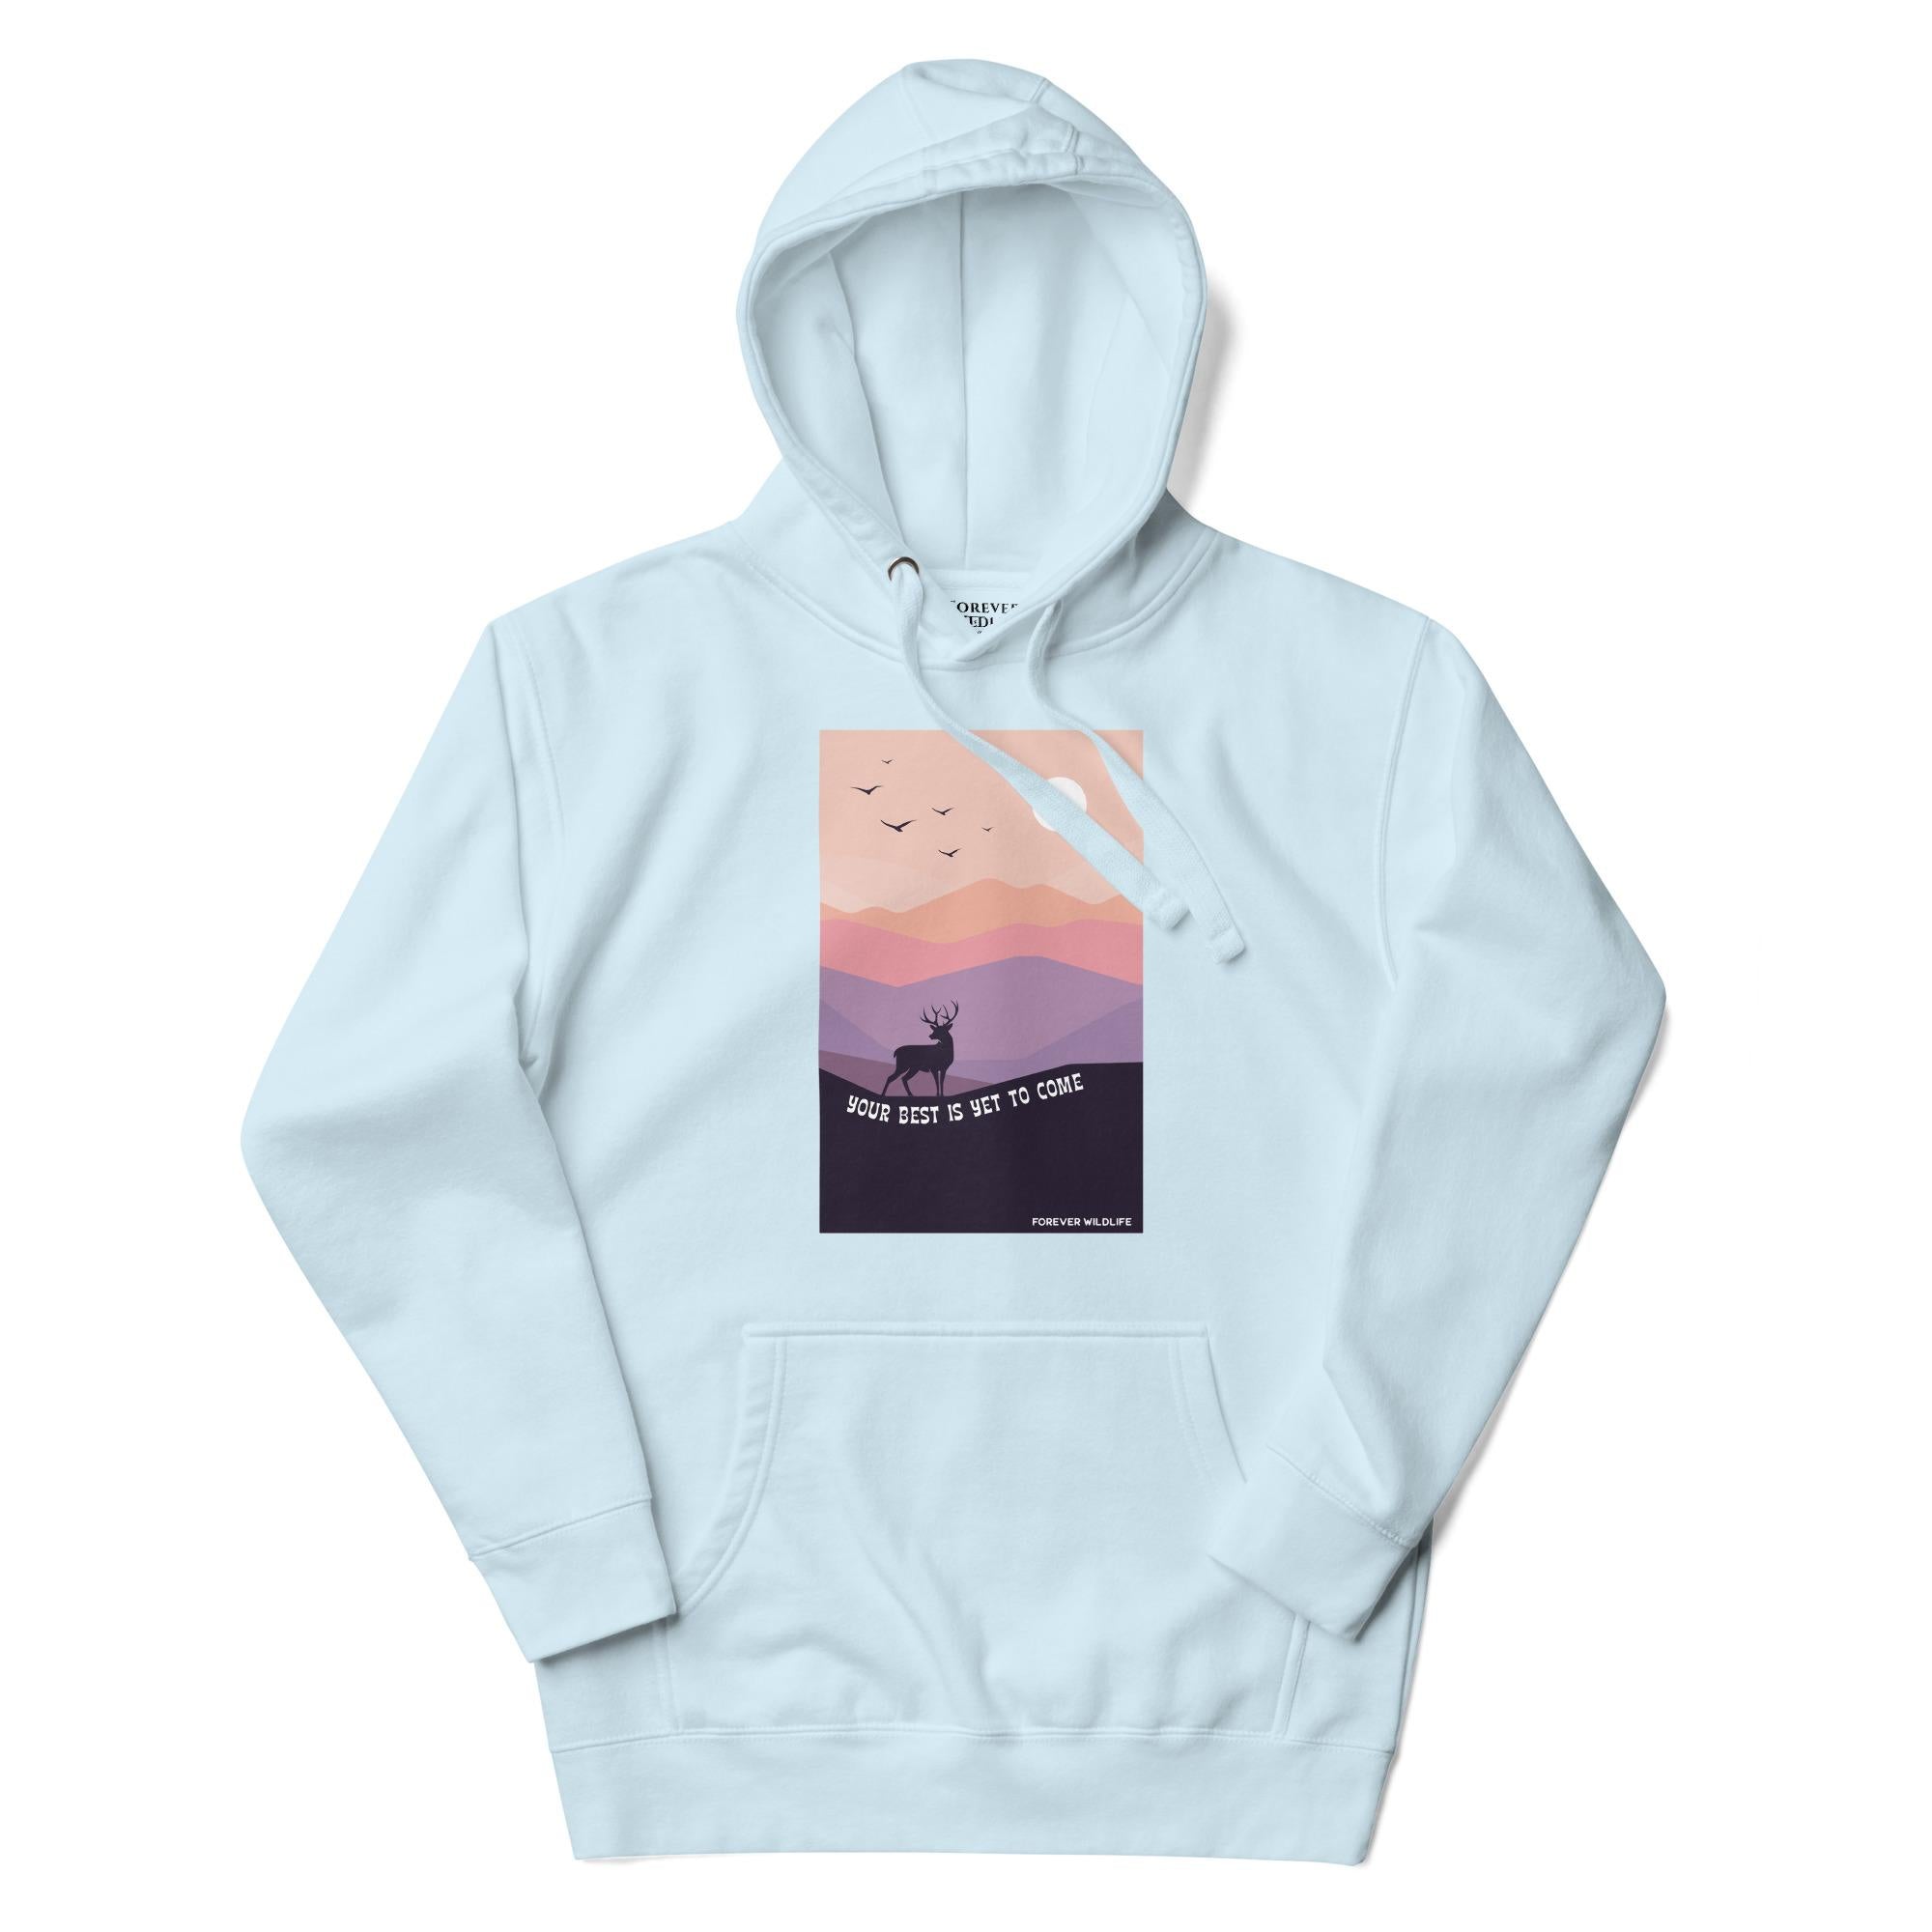 Deer Hoodie in Sky Blue – Premium Wildlife Animal Inspirational Hoodie Design with Your Best Is Yet To Come text, part of Wildlife Hoodies & Clothing from Forever Wildlife